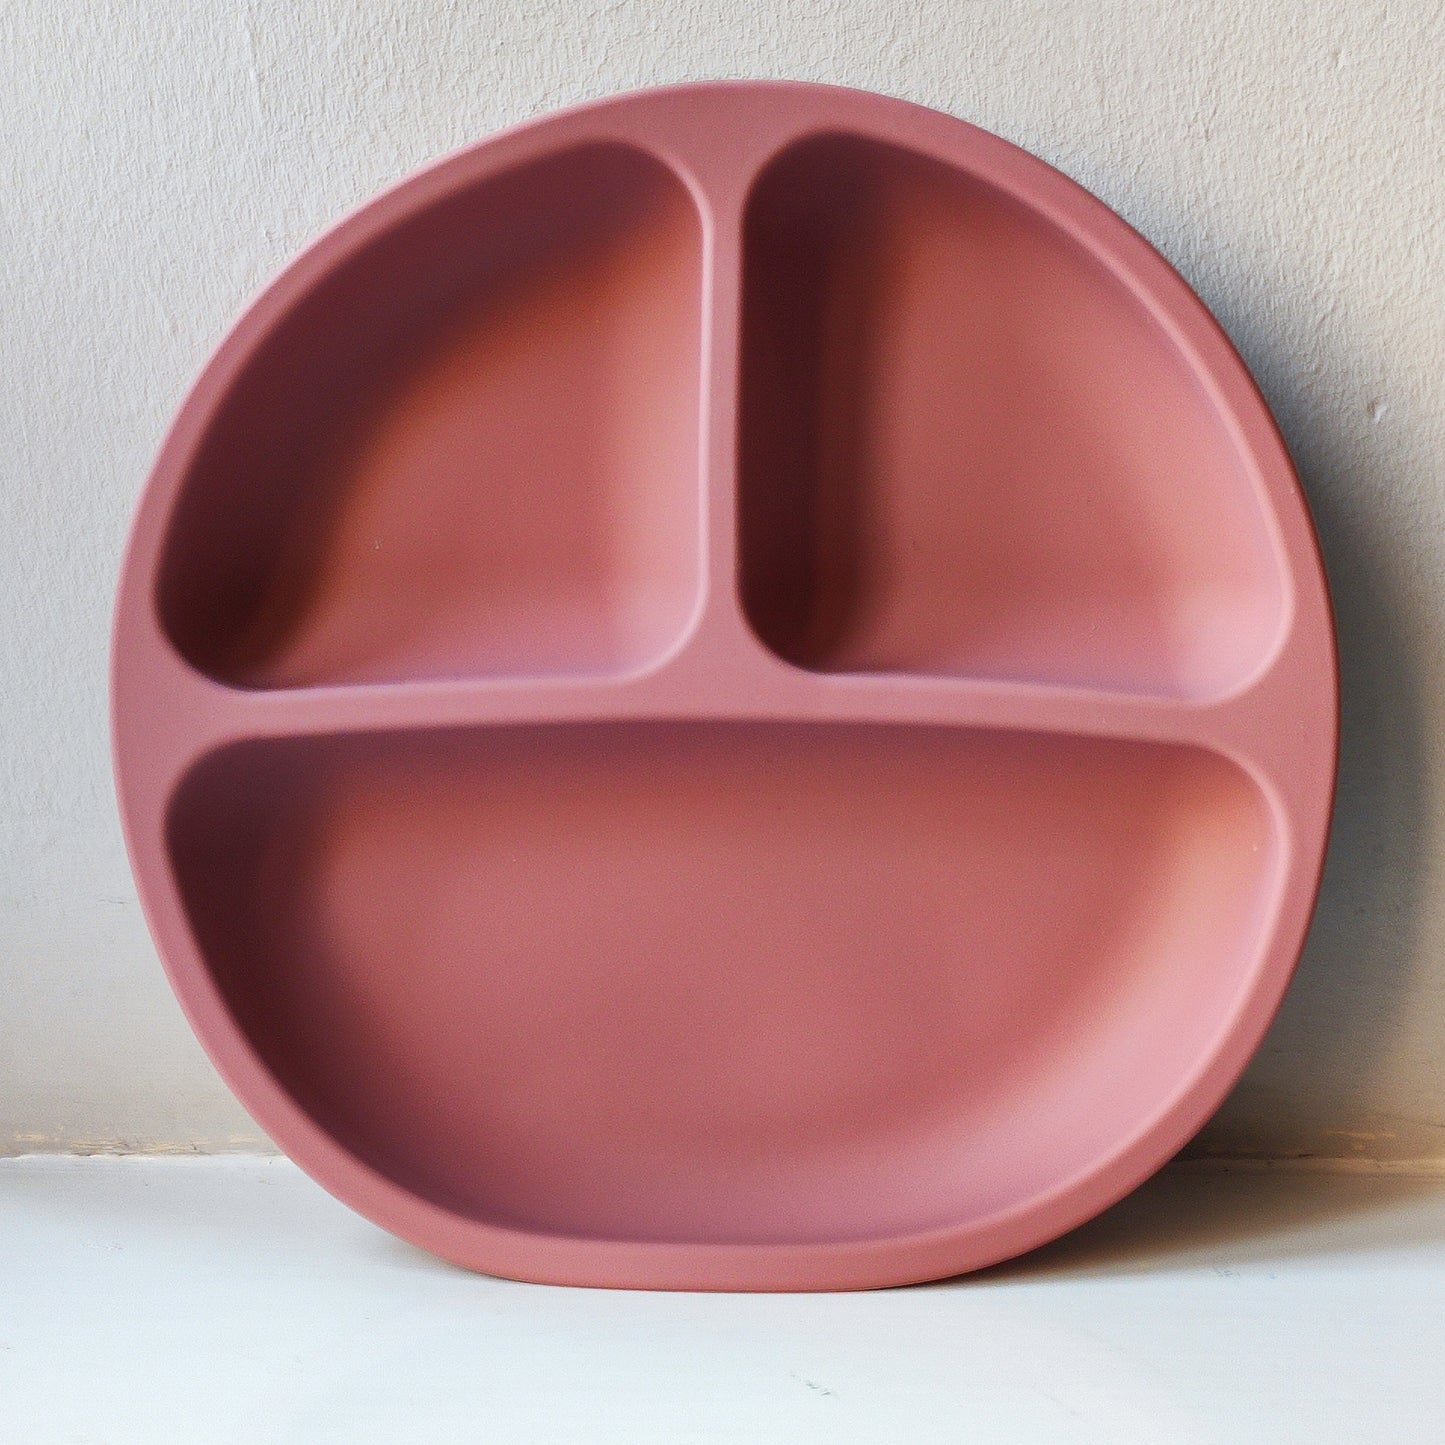 Silicone divided plate